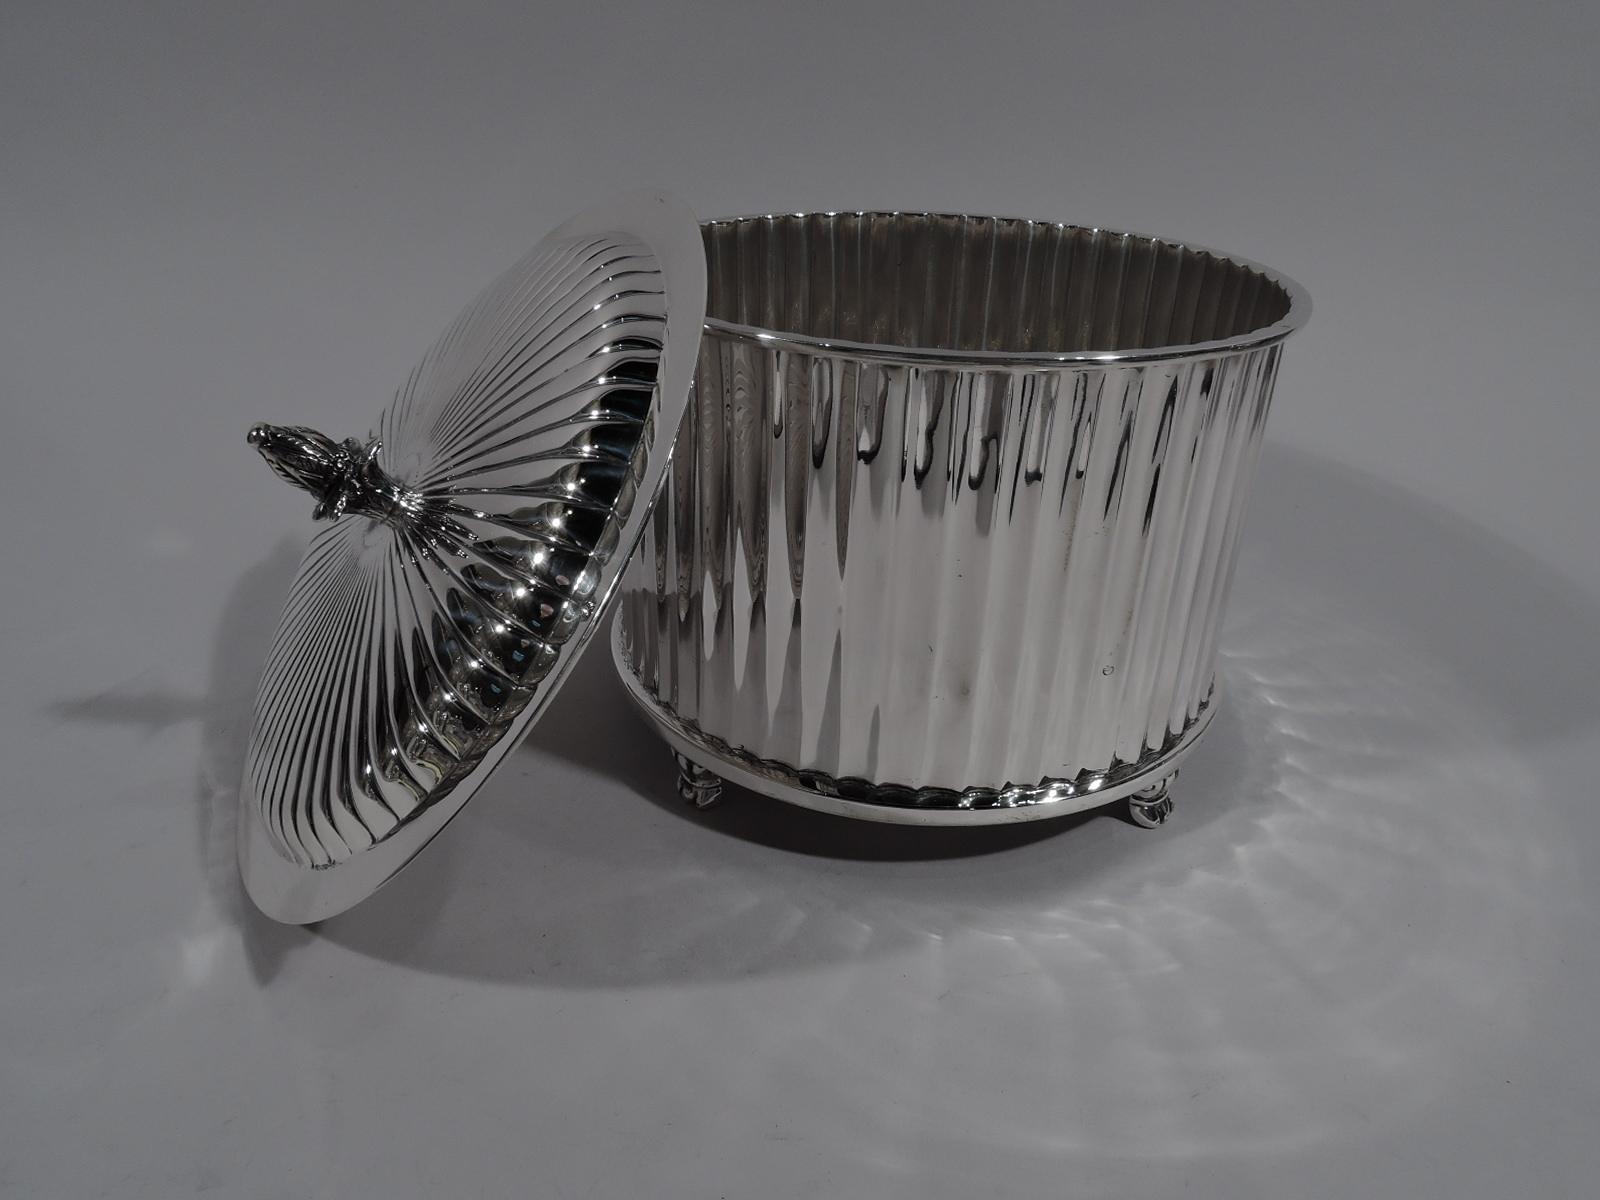 American classical sterling silver box, circa 1930. Retailed by Cartier in New York. Round and straight with columnar style fluting and ornamental supports. Cover raised with radiating gadrooning and bud finial. Marked “Cartier Sterling”. Weight: 33